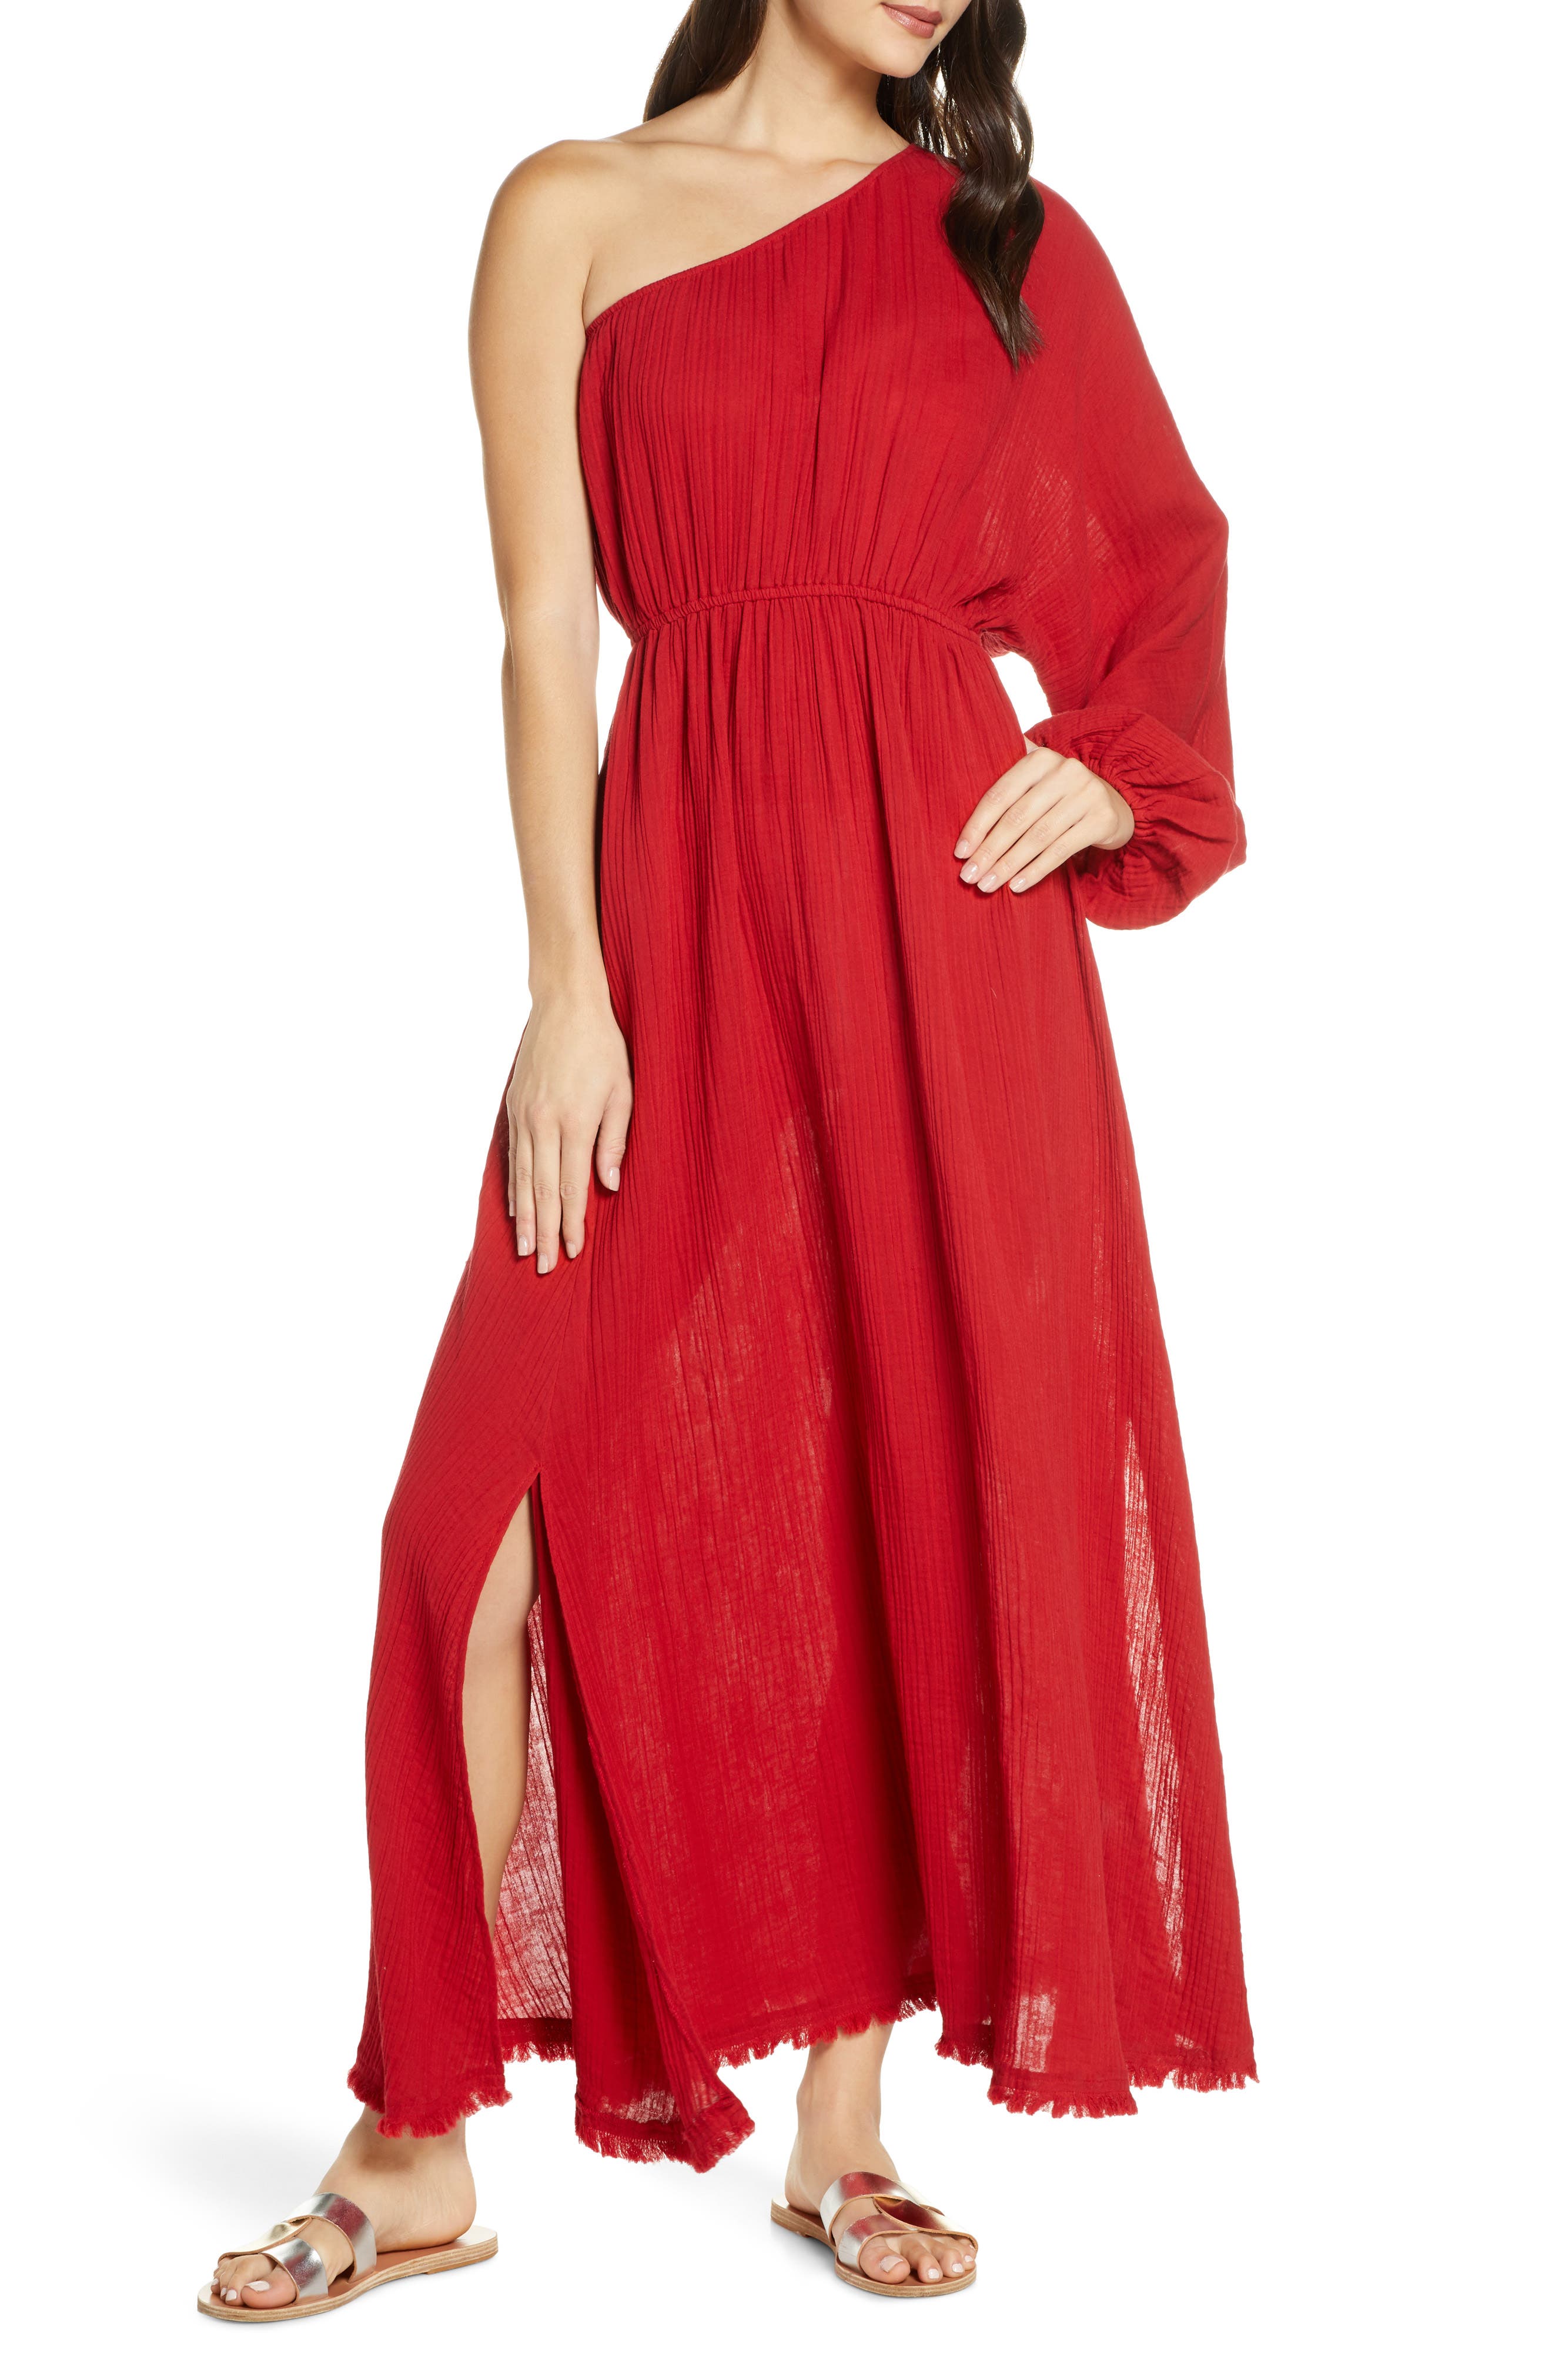 Women's Red Carter Clothing | Nordstrom